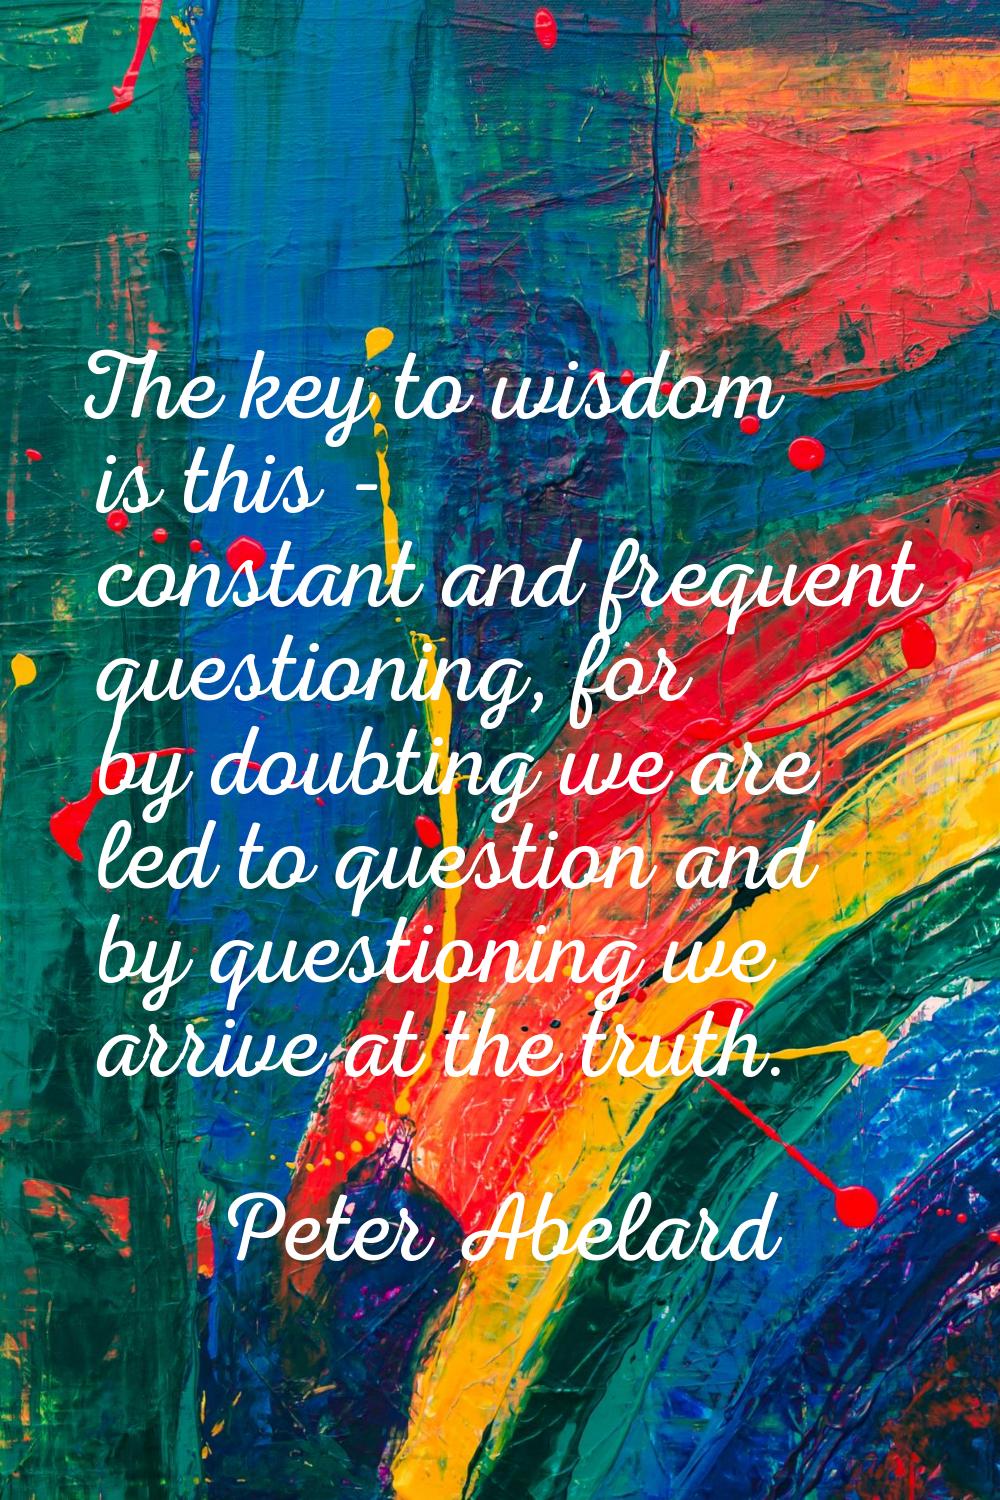 The key to wisdom is this - constant and frequent questioning, for by doubting we are led to questi